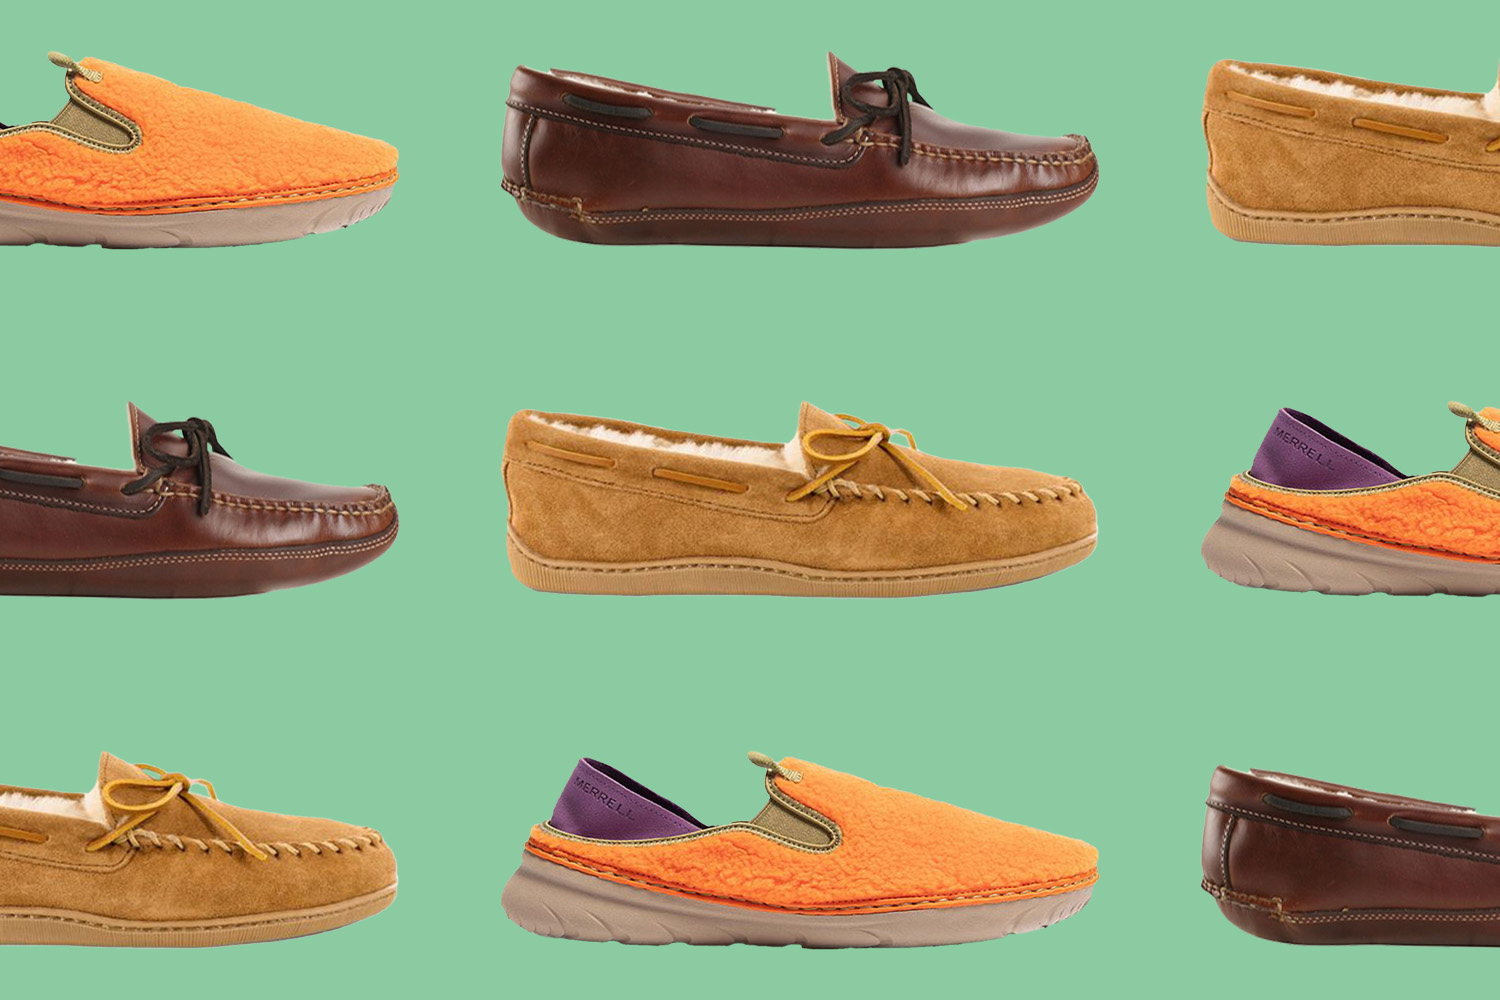 17 Pairs of Slippers and House Shoes to Help You Survive the Cold Weather